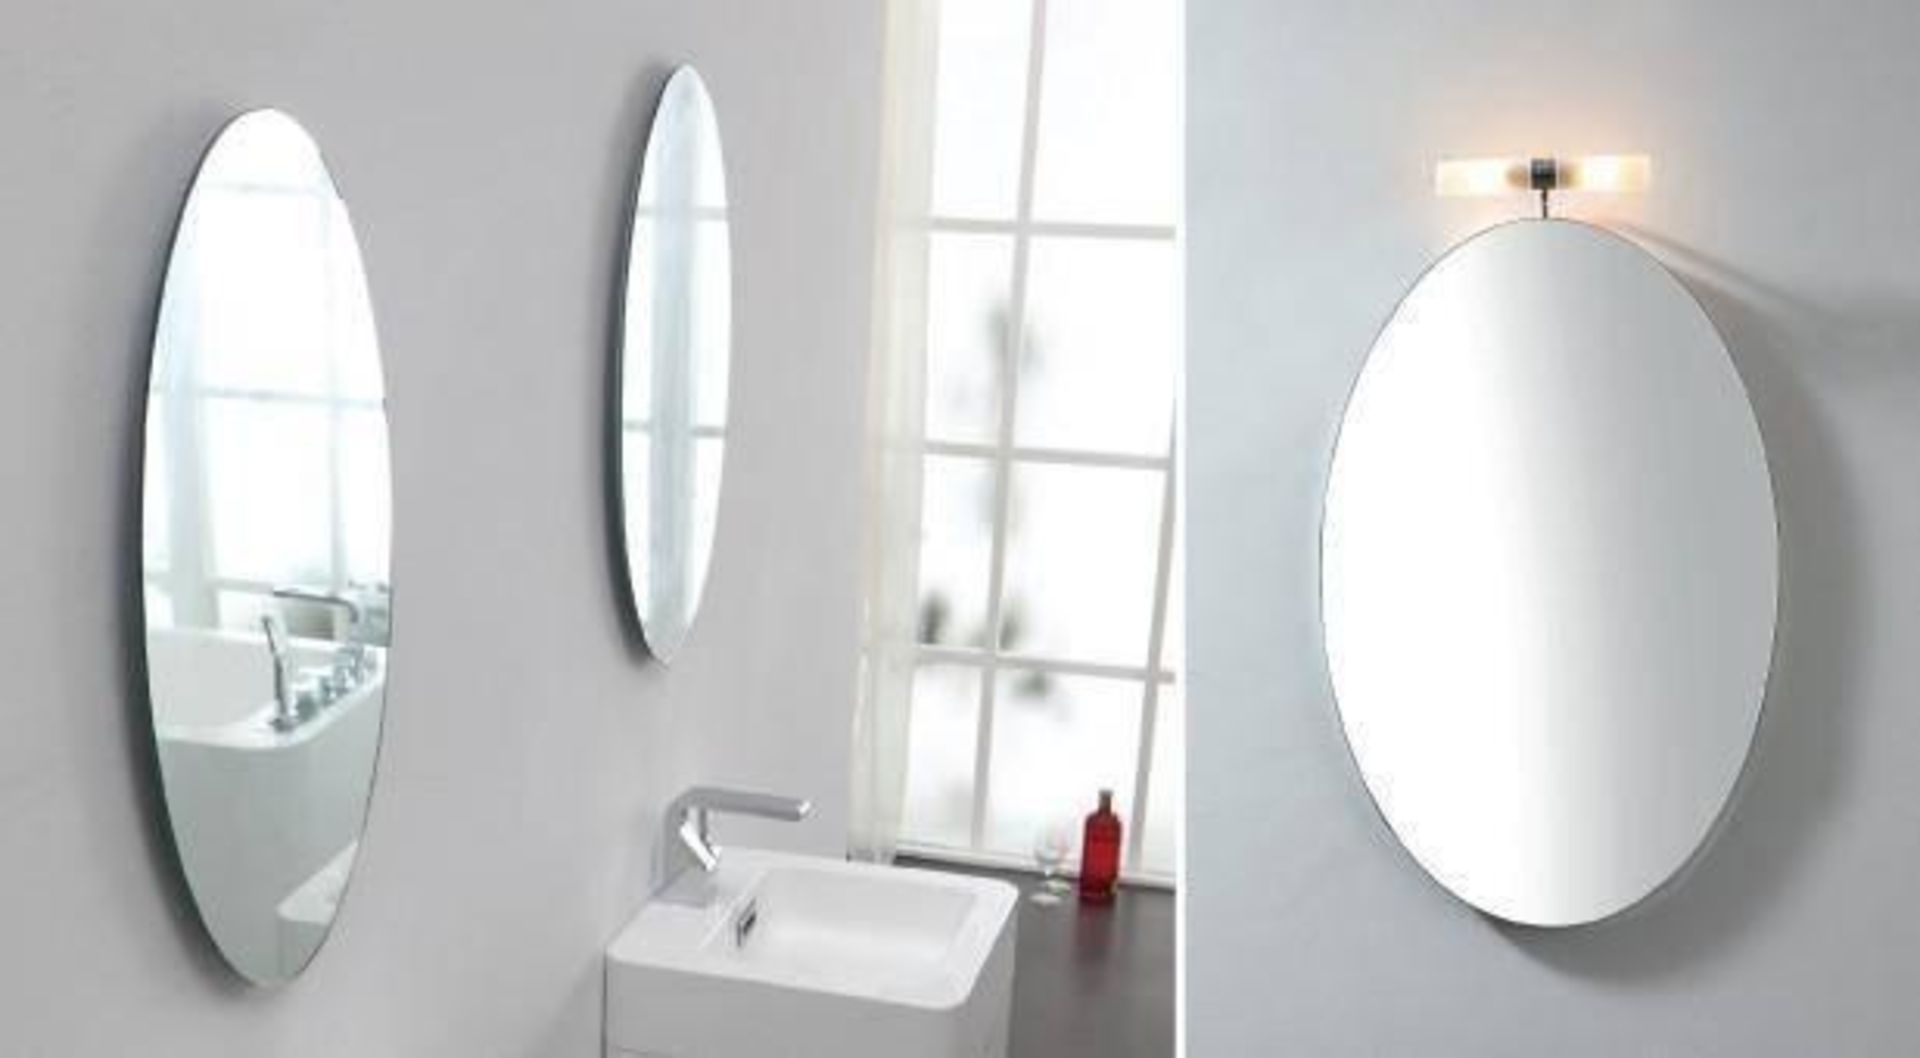 1 x Stylish Bathroom Oval Mirror 45 with top light - A-Grade - Ref:AMR14-045 - CL170 - Location: Not - Image 3 of 4